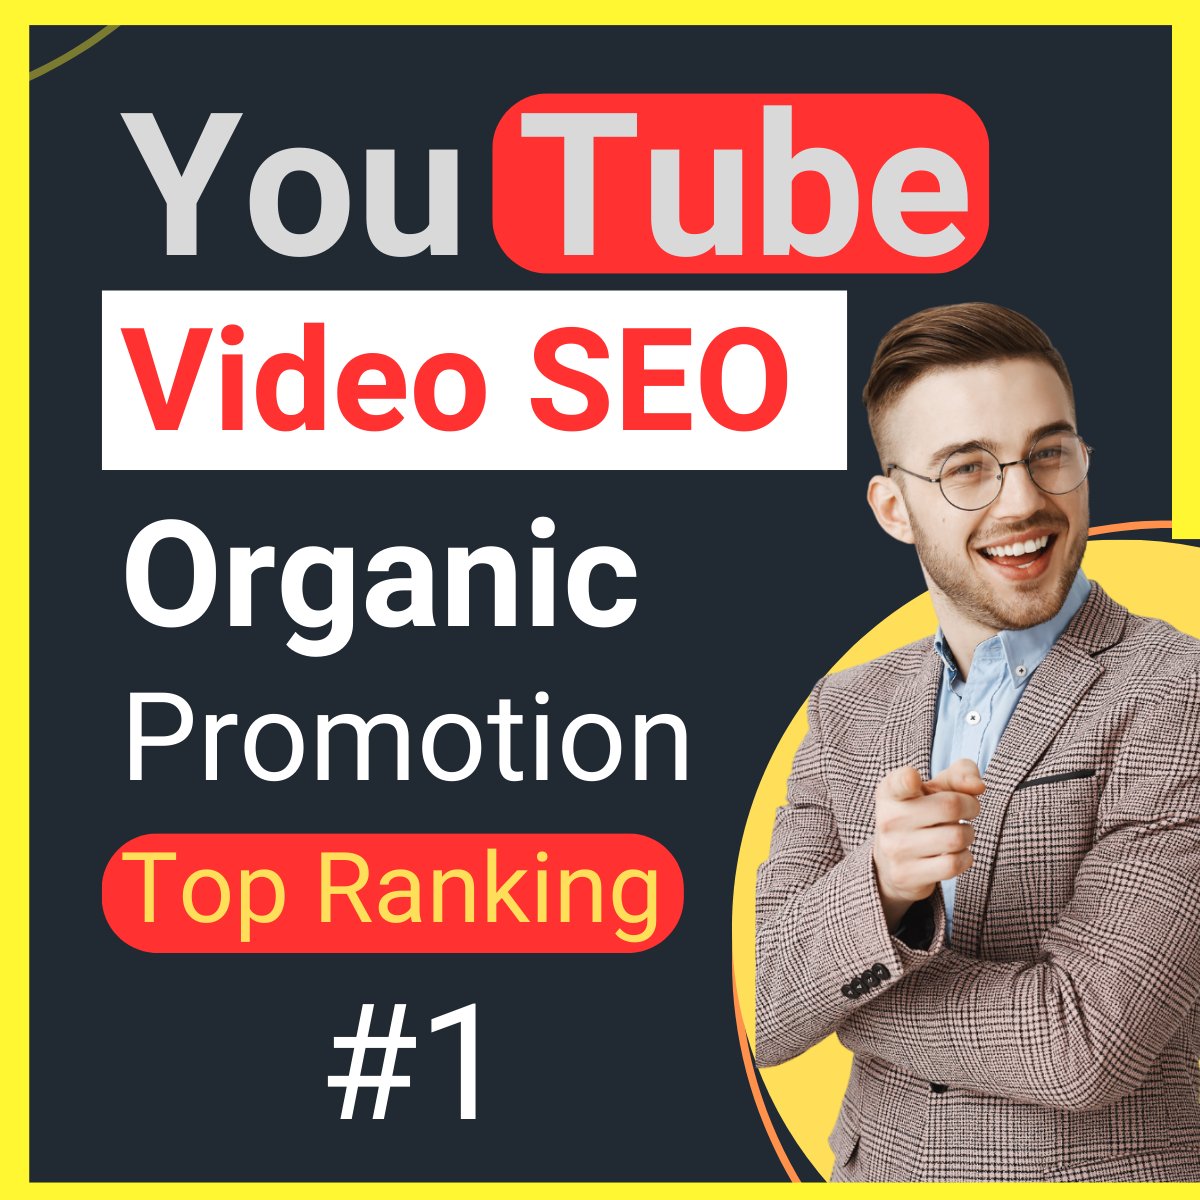 WHY ARE MY VIDEO NOT APPEARING AT THE TOP? No matter how great your video is, if you don't do proper SEO and keyword research for your title, description, tags, and more, you won't get any views. #YouTubeSEO #VideoExpert #OrganicPromotion #YouTubePromotion #DigitalMarketing